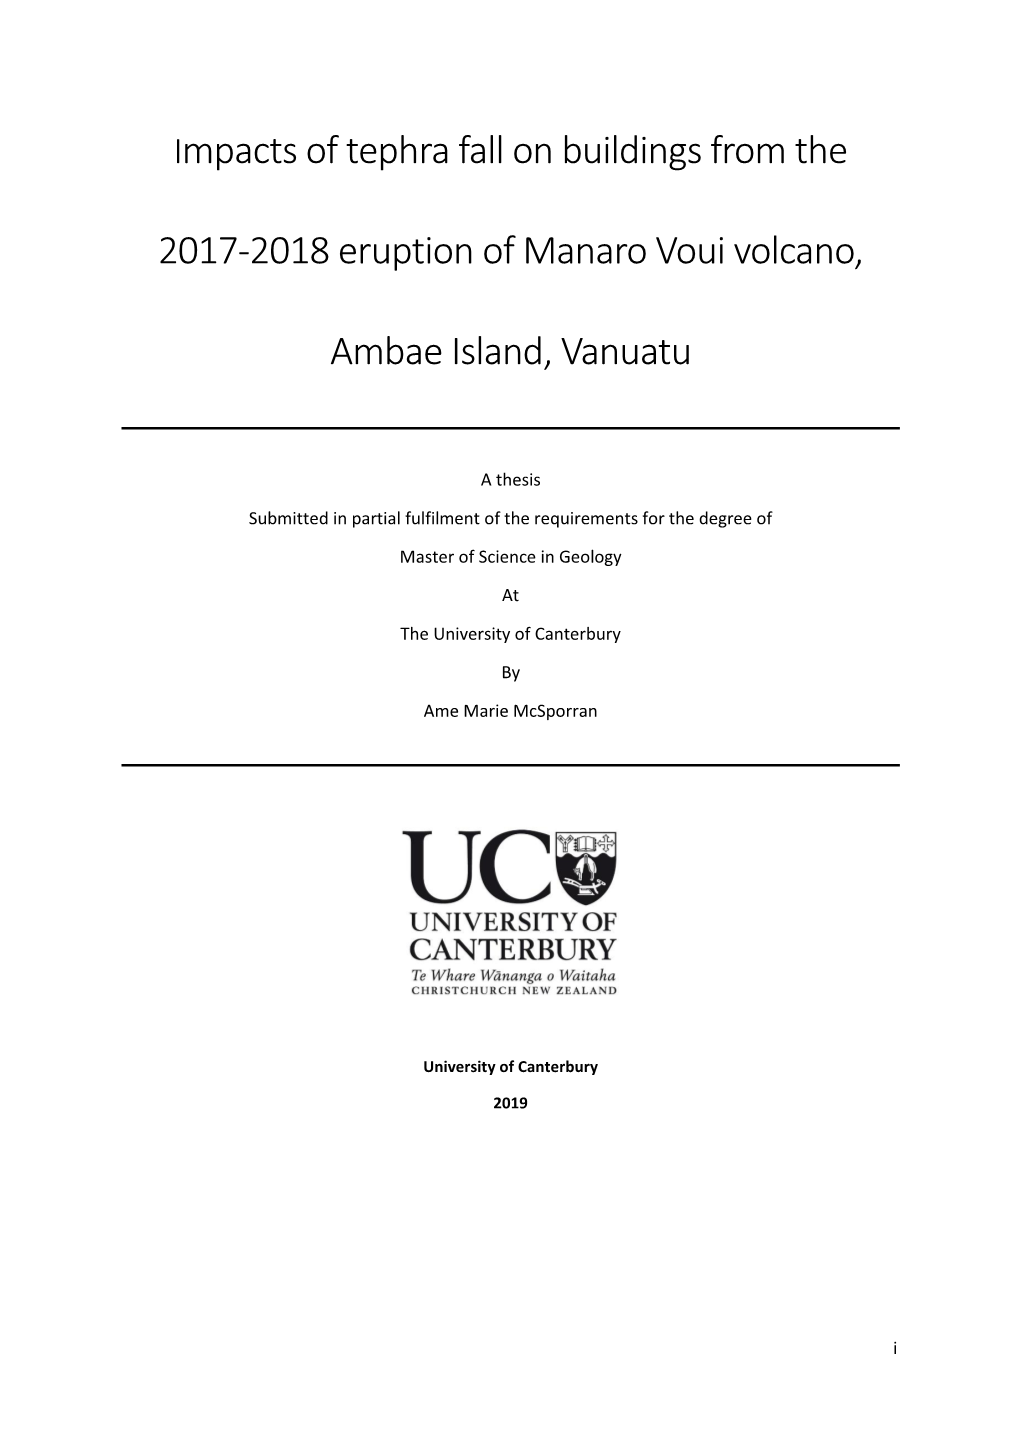 Impacts of Tephra Fall on Buildings from the 2017-2018 Eruption of Manaro